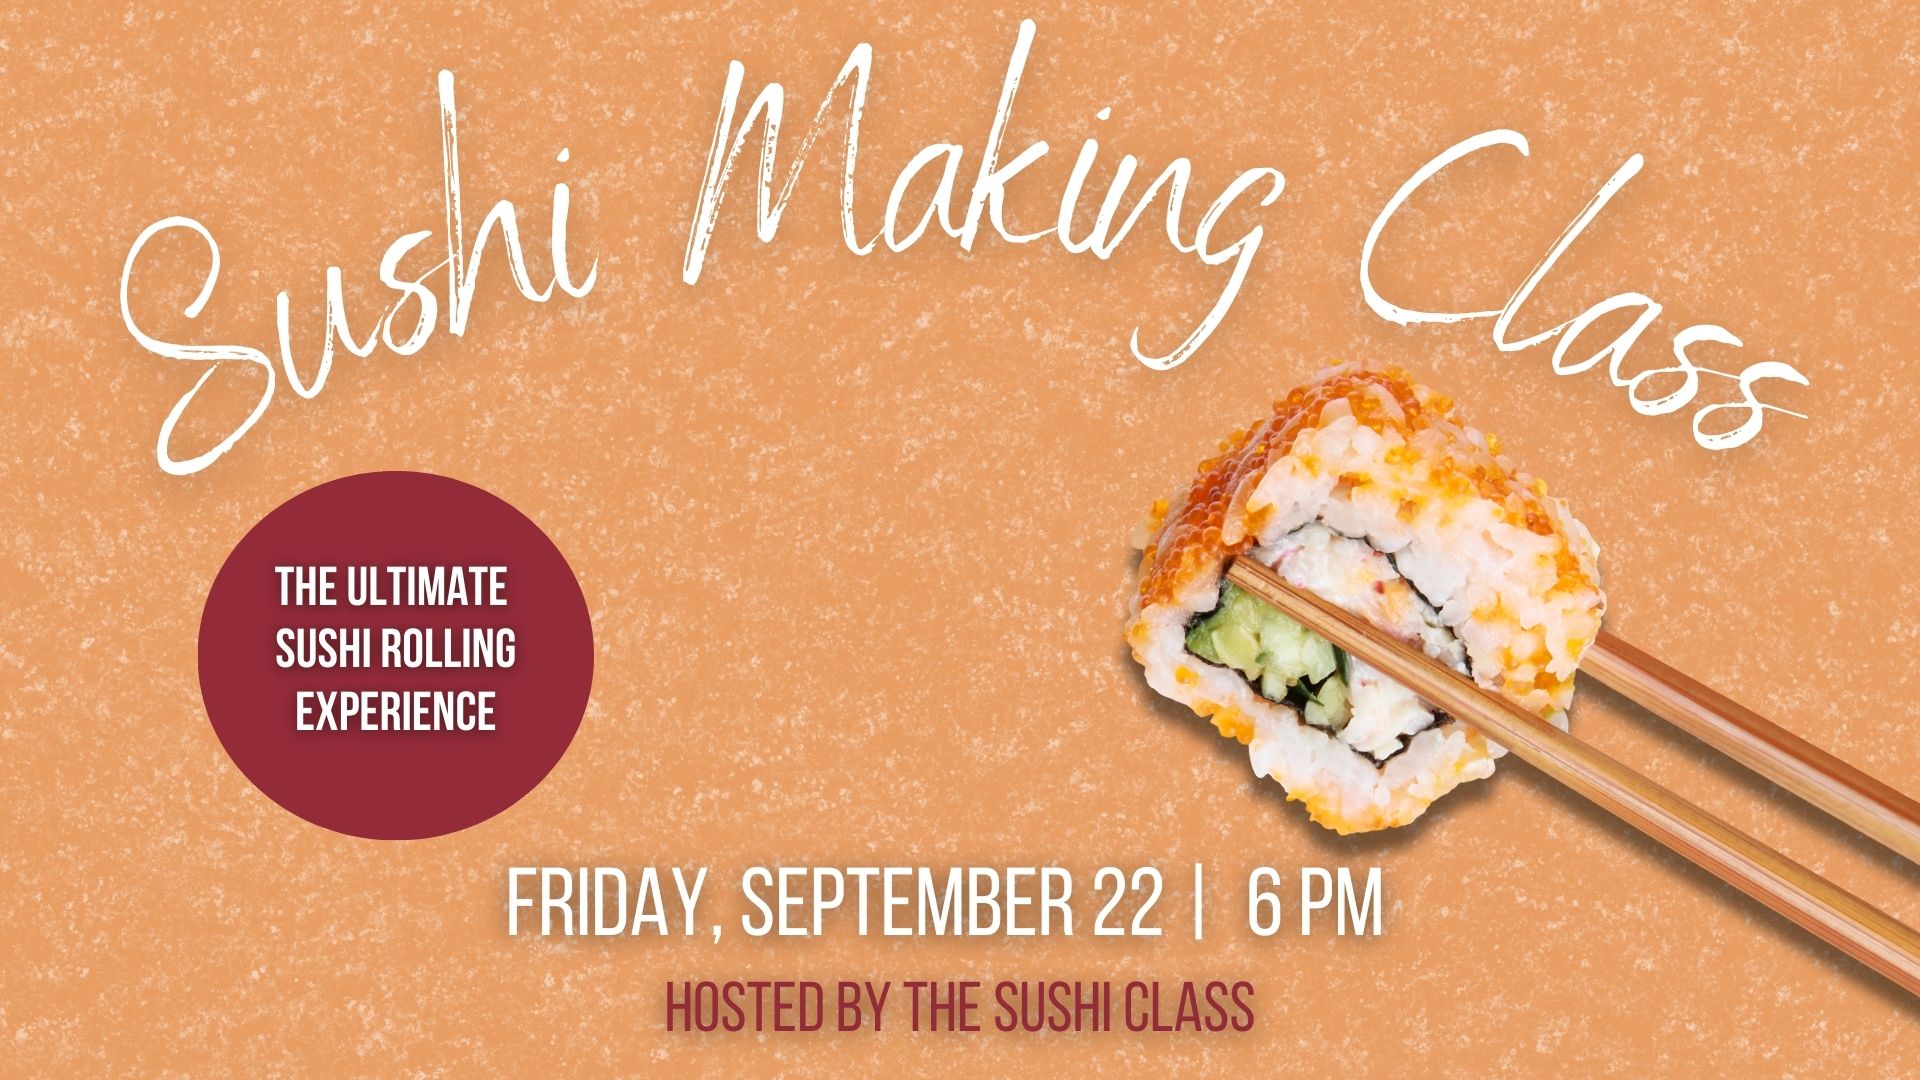 promo graphic for a sushi making class on september 22 at 6 pm